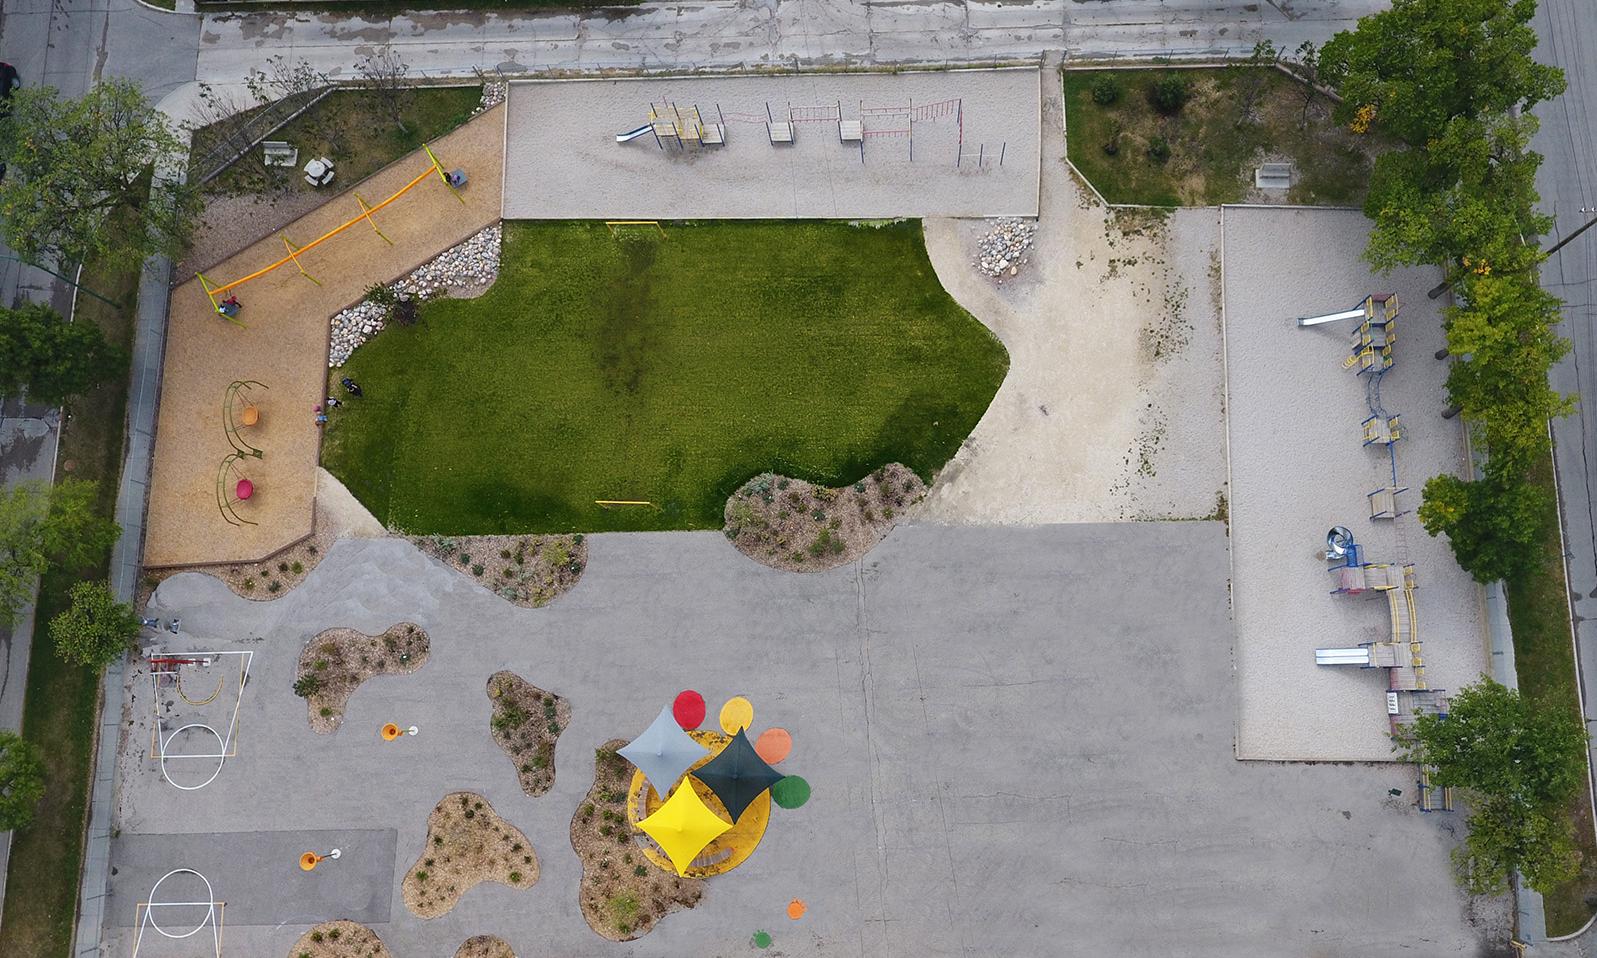 Ecole Provencher Schoolyard. An aerial view of the entire schoolyard including a green space, slides, plantings, umbrellas and seating area, hopscotch, and tarmac.